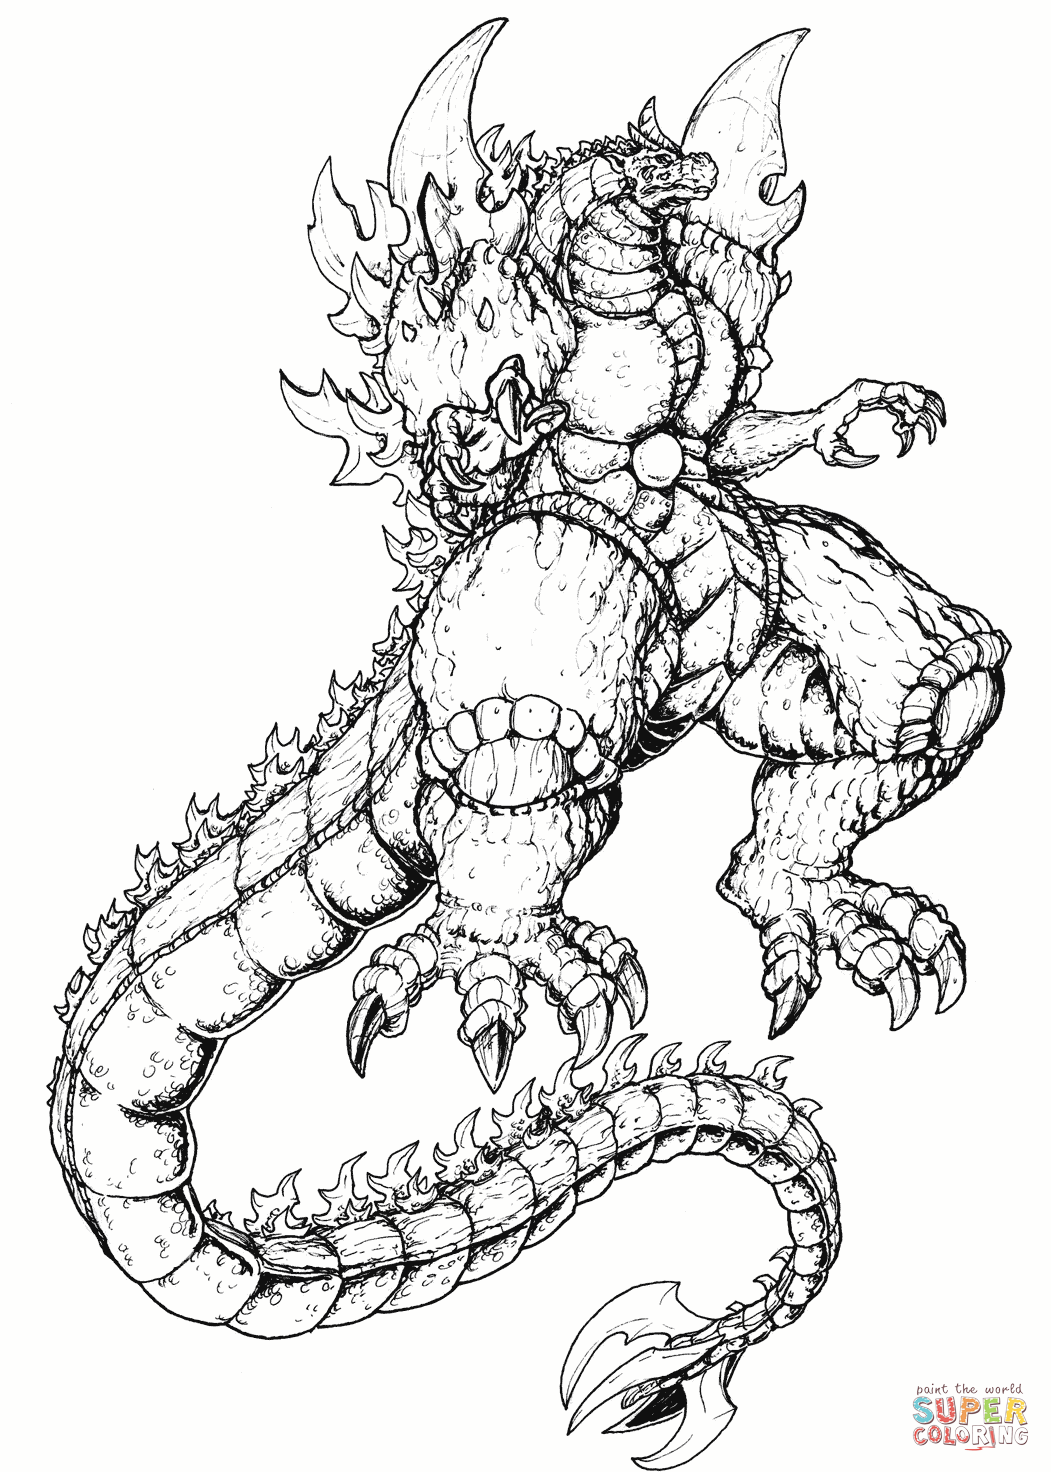 Super godzilla coloring page free printable coloring pages